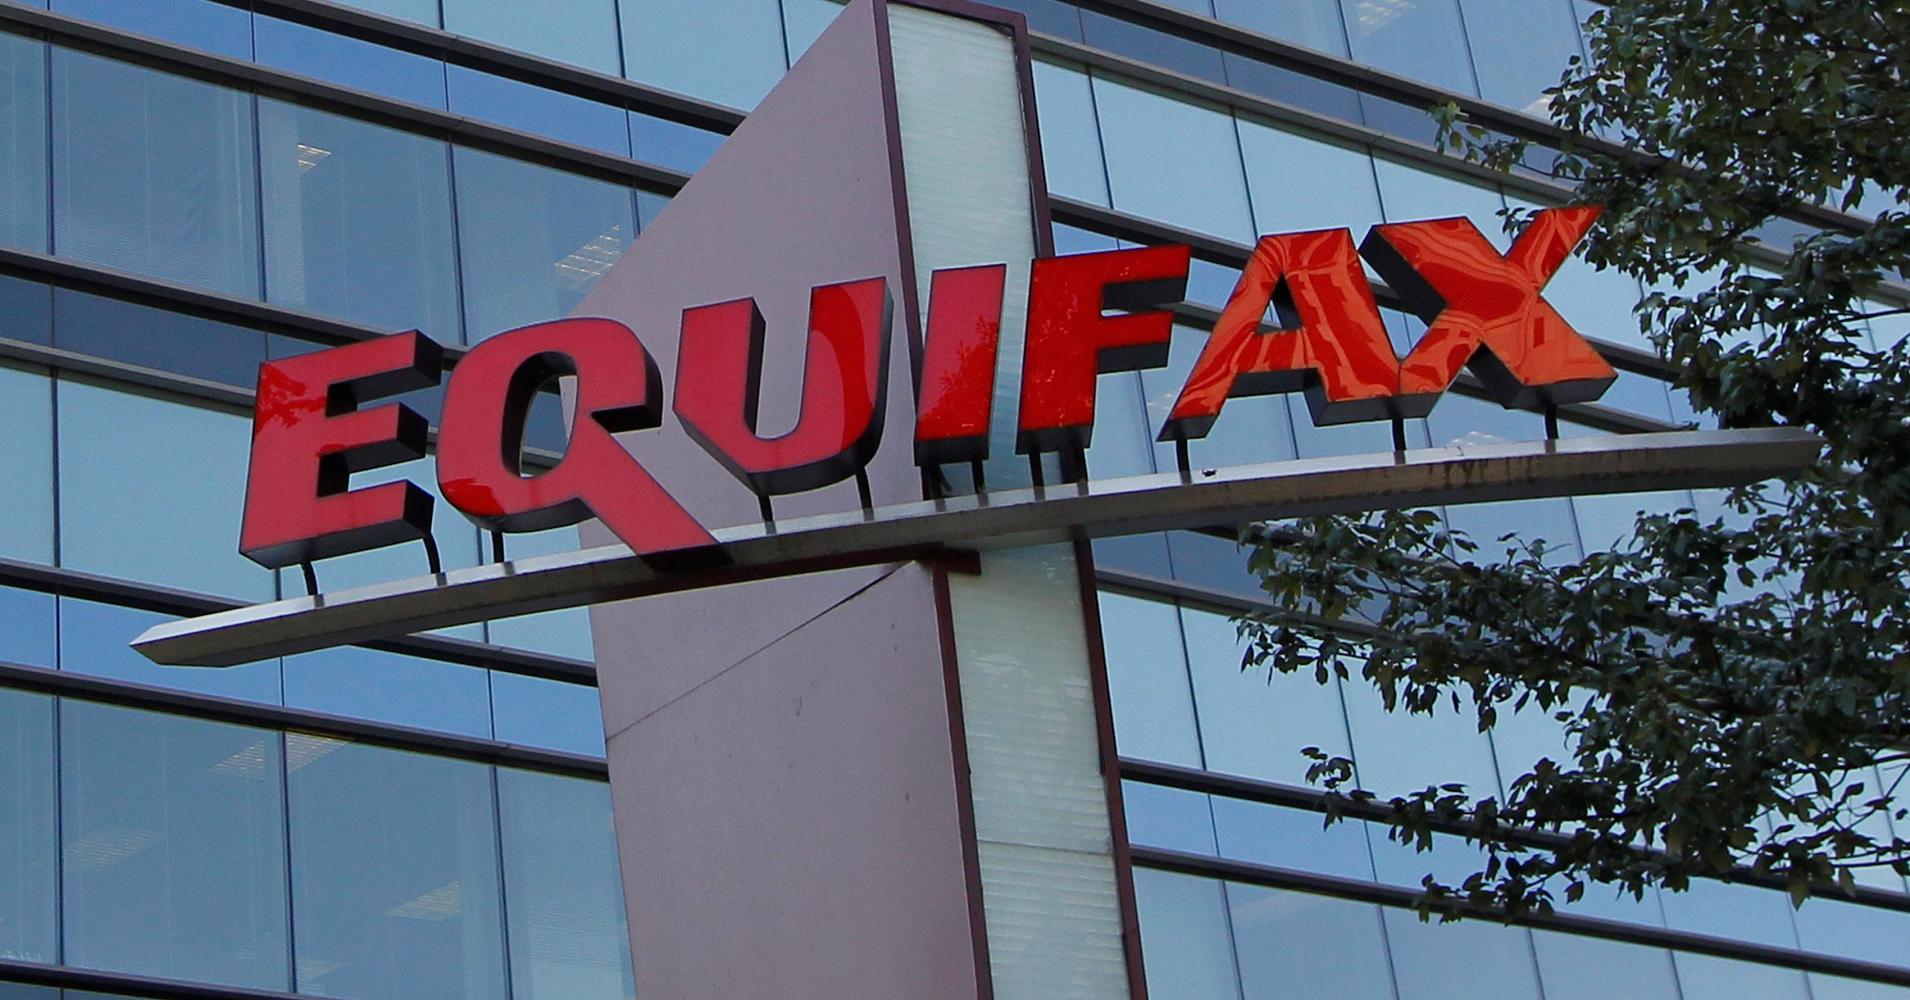 Hackers apparently accessed more personal data from Equifax than what was previously known